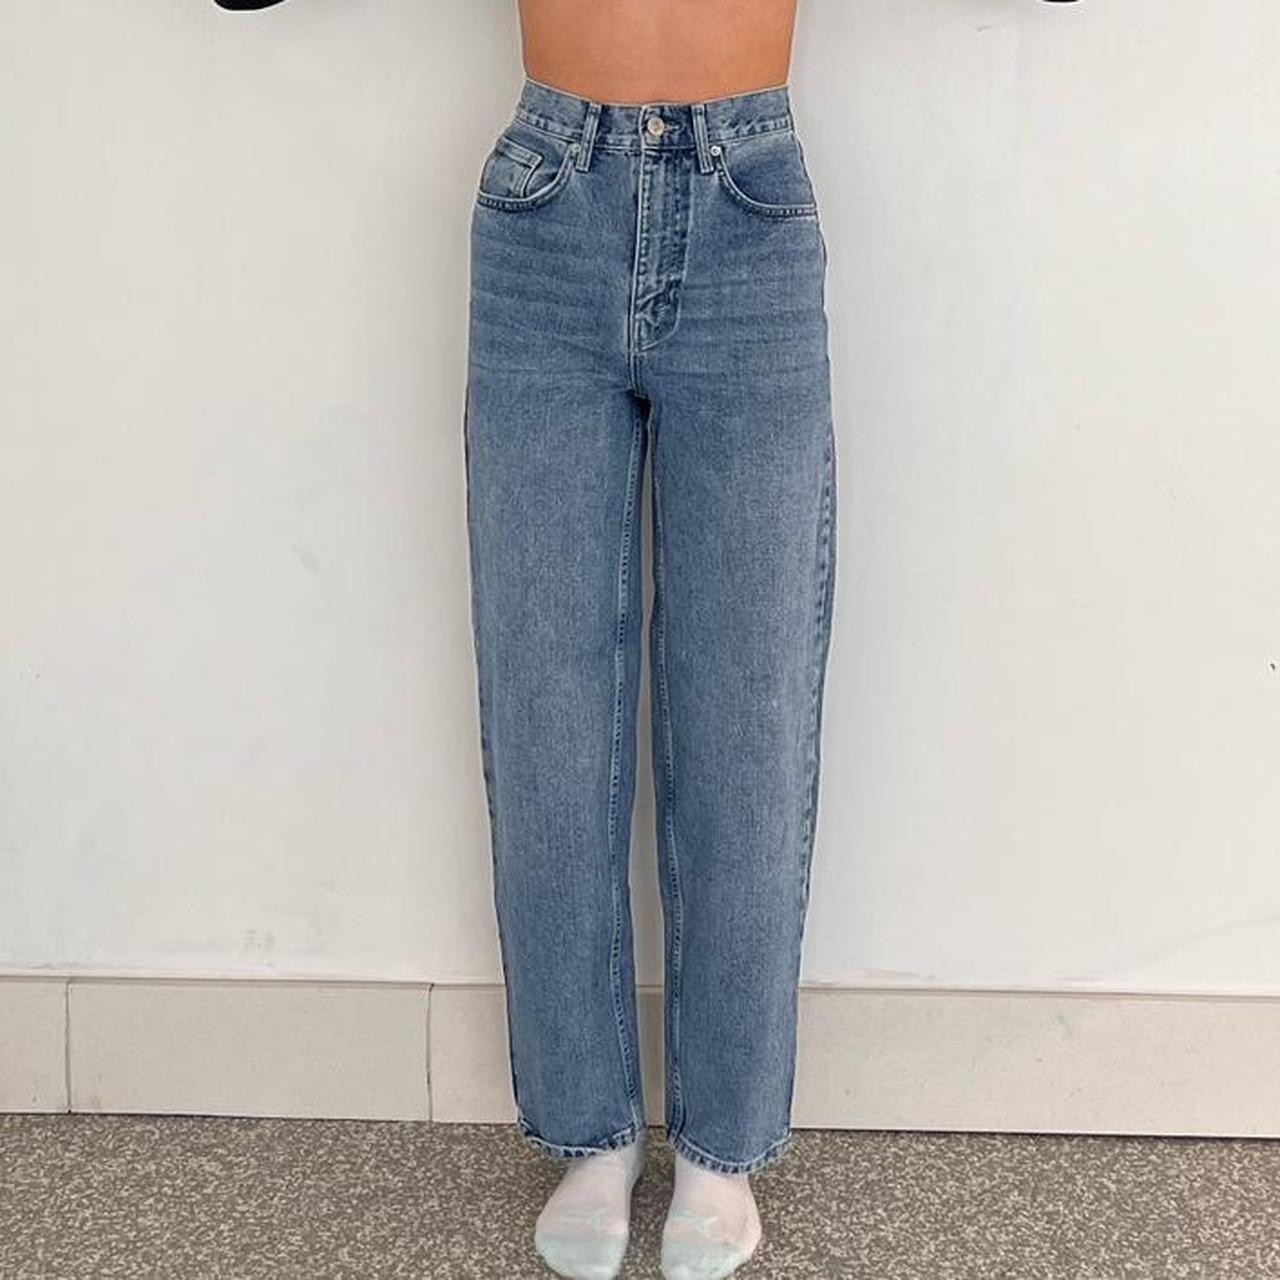 BDG Urban Outfitters Blue Corduroy Mom Jeans Womens Size 28 High Waisted